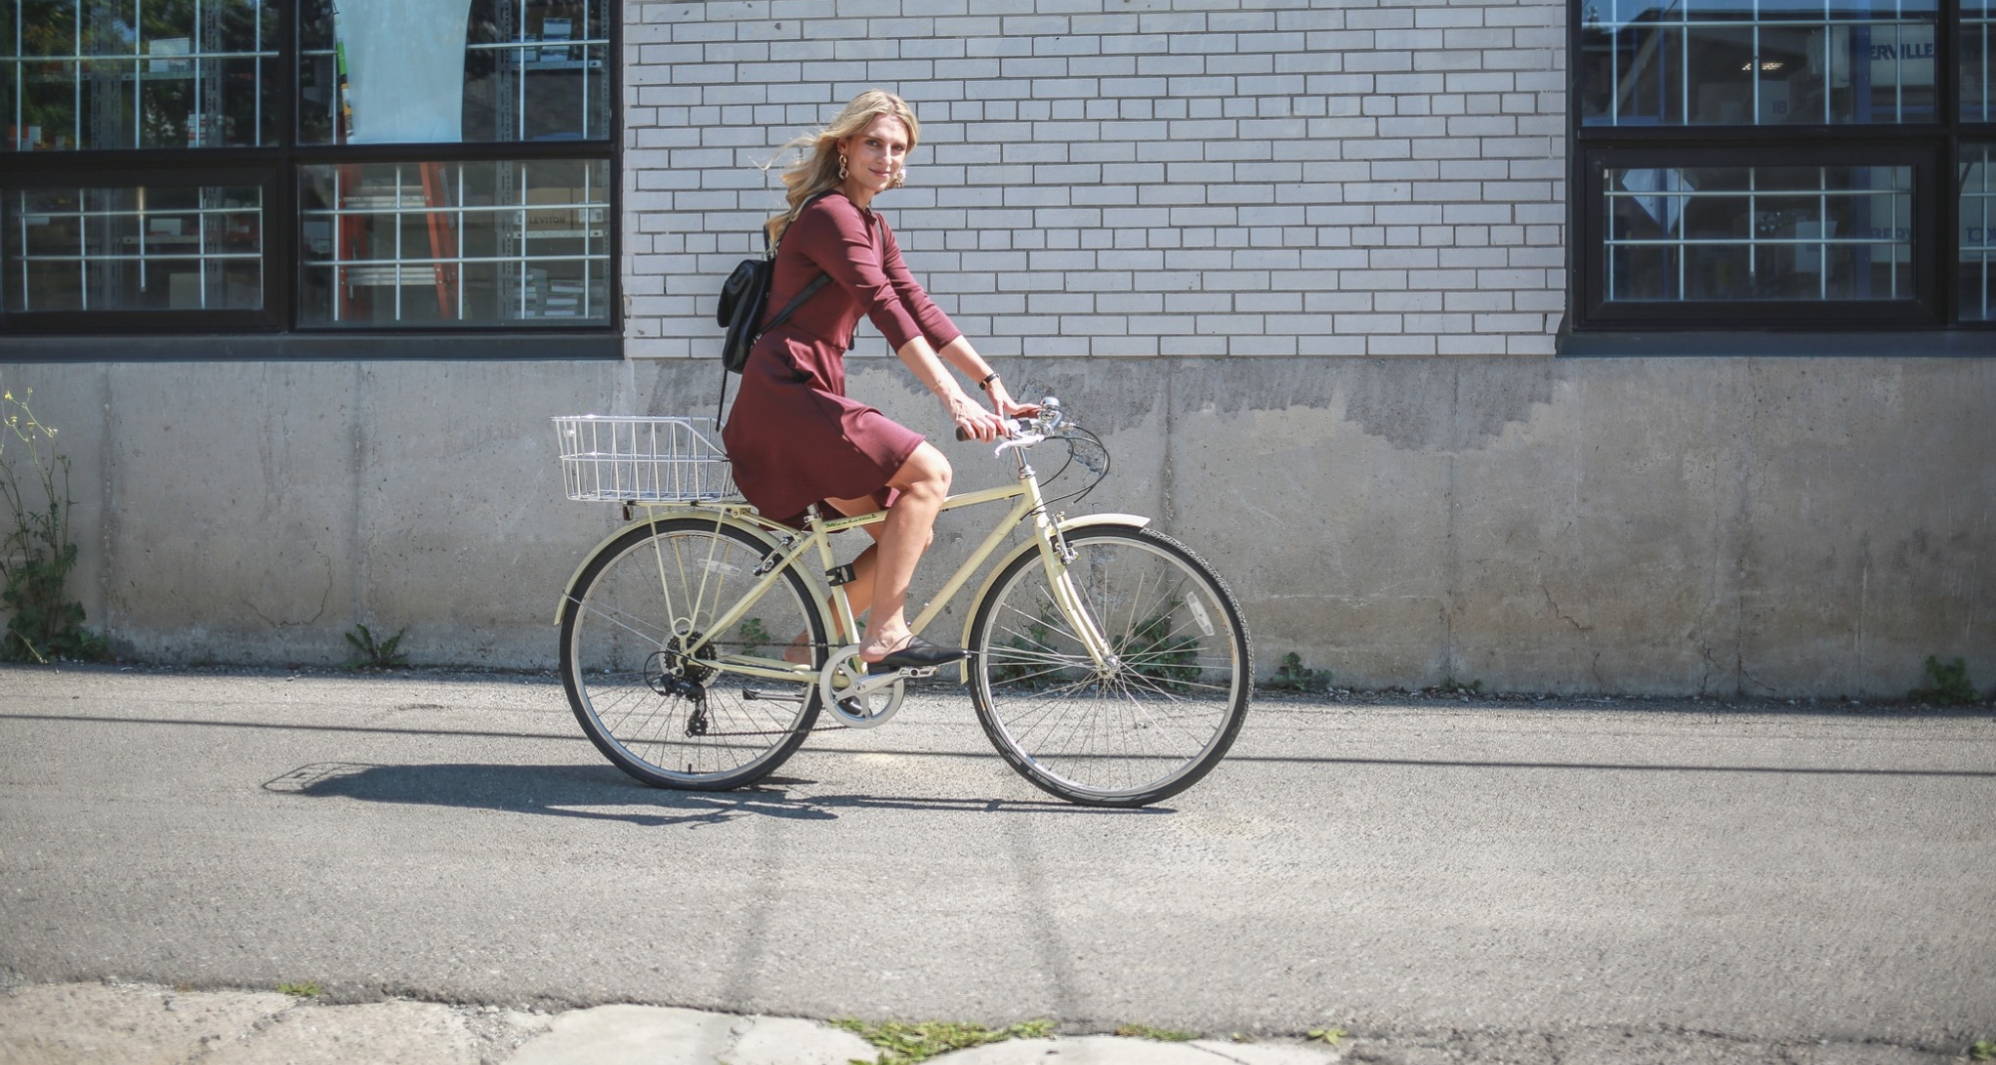 A woman bikes down a city street, wearing a dress from capsule wardrobe brand Encircled.